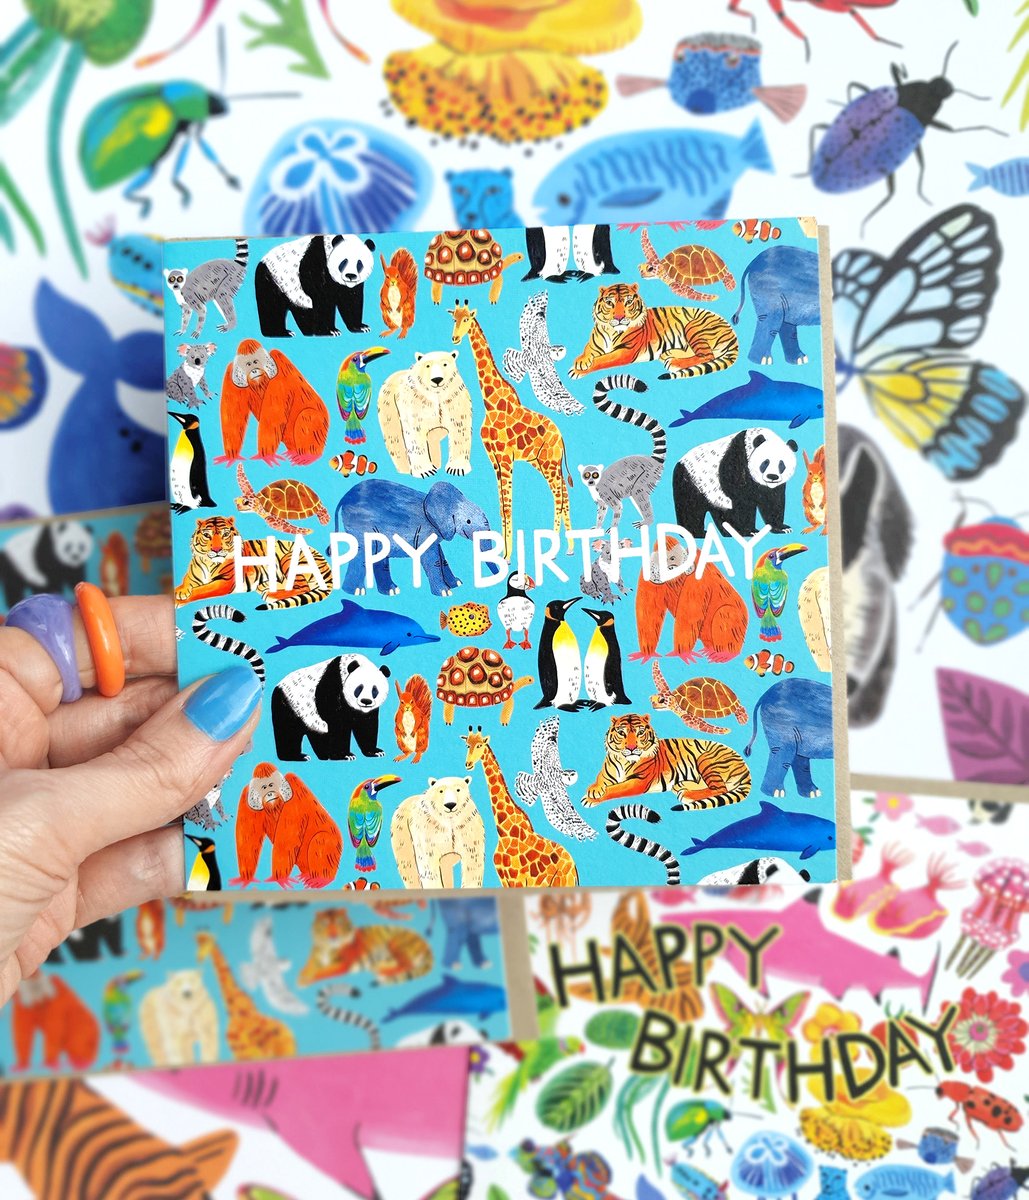 Love the greeting cards for EarlyBird Designs! Such vibrant colours and printed on new recycled card. Animal Pattern & Rainbow Animals card designs 👉bit.ly/3mJ3JkM @EBirdcards #greetingcards #birthday #birthdaycards #Illustrator #illustrated #kidlitartist